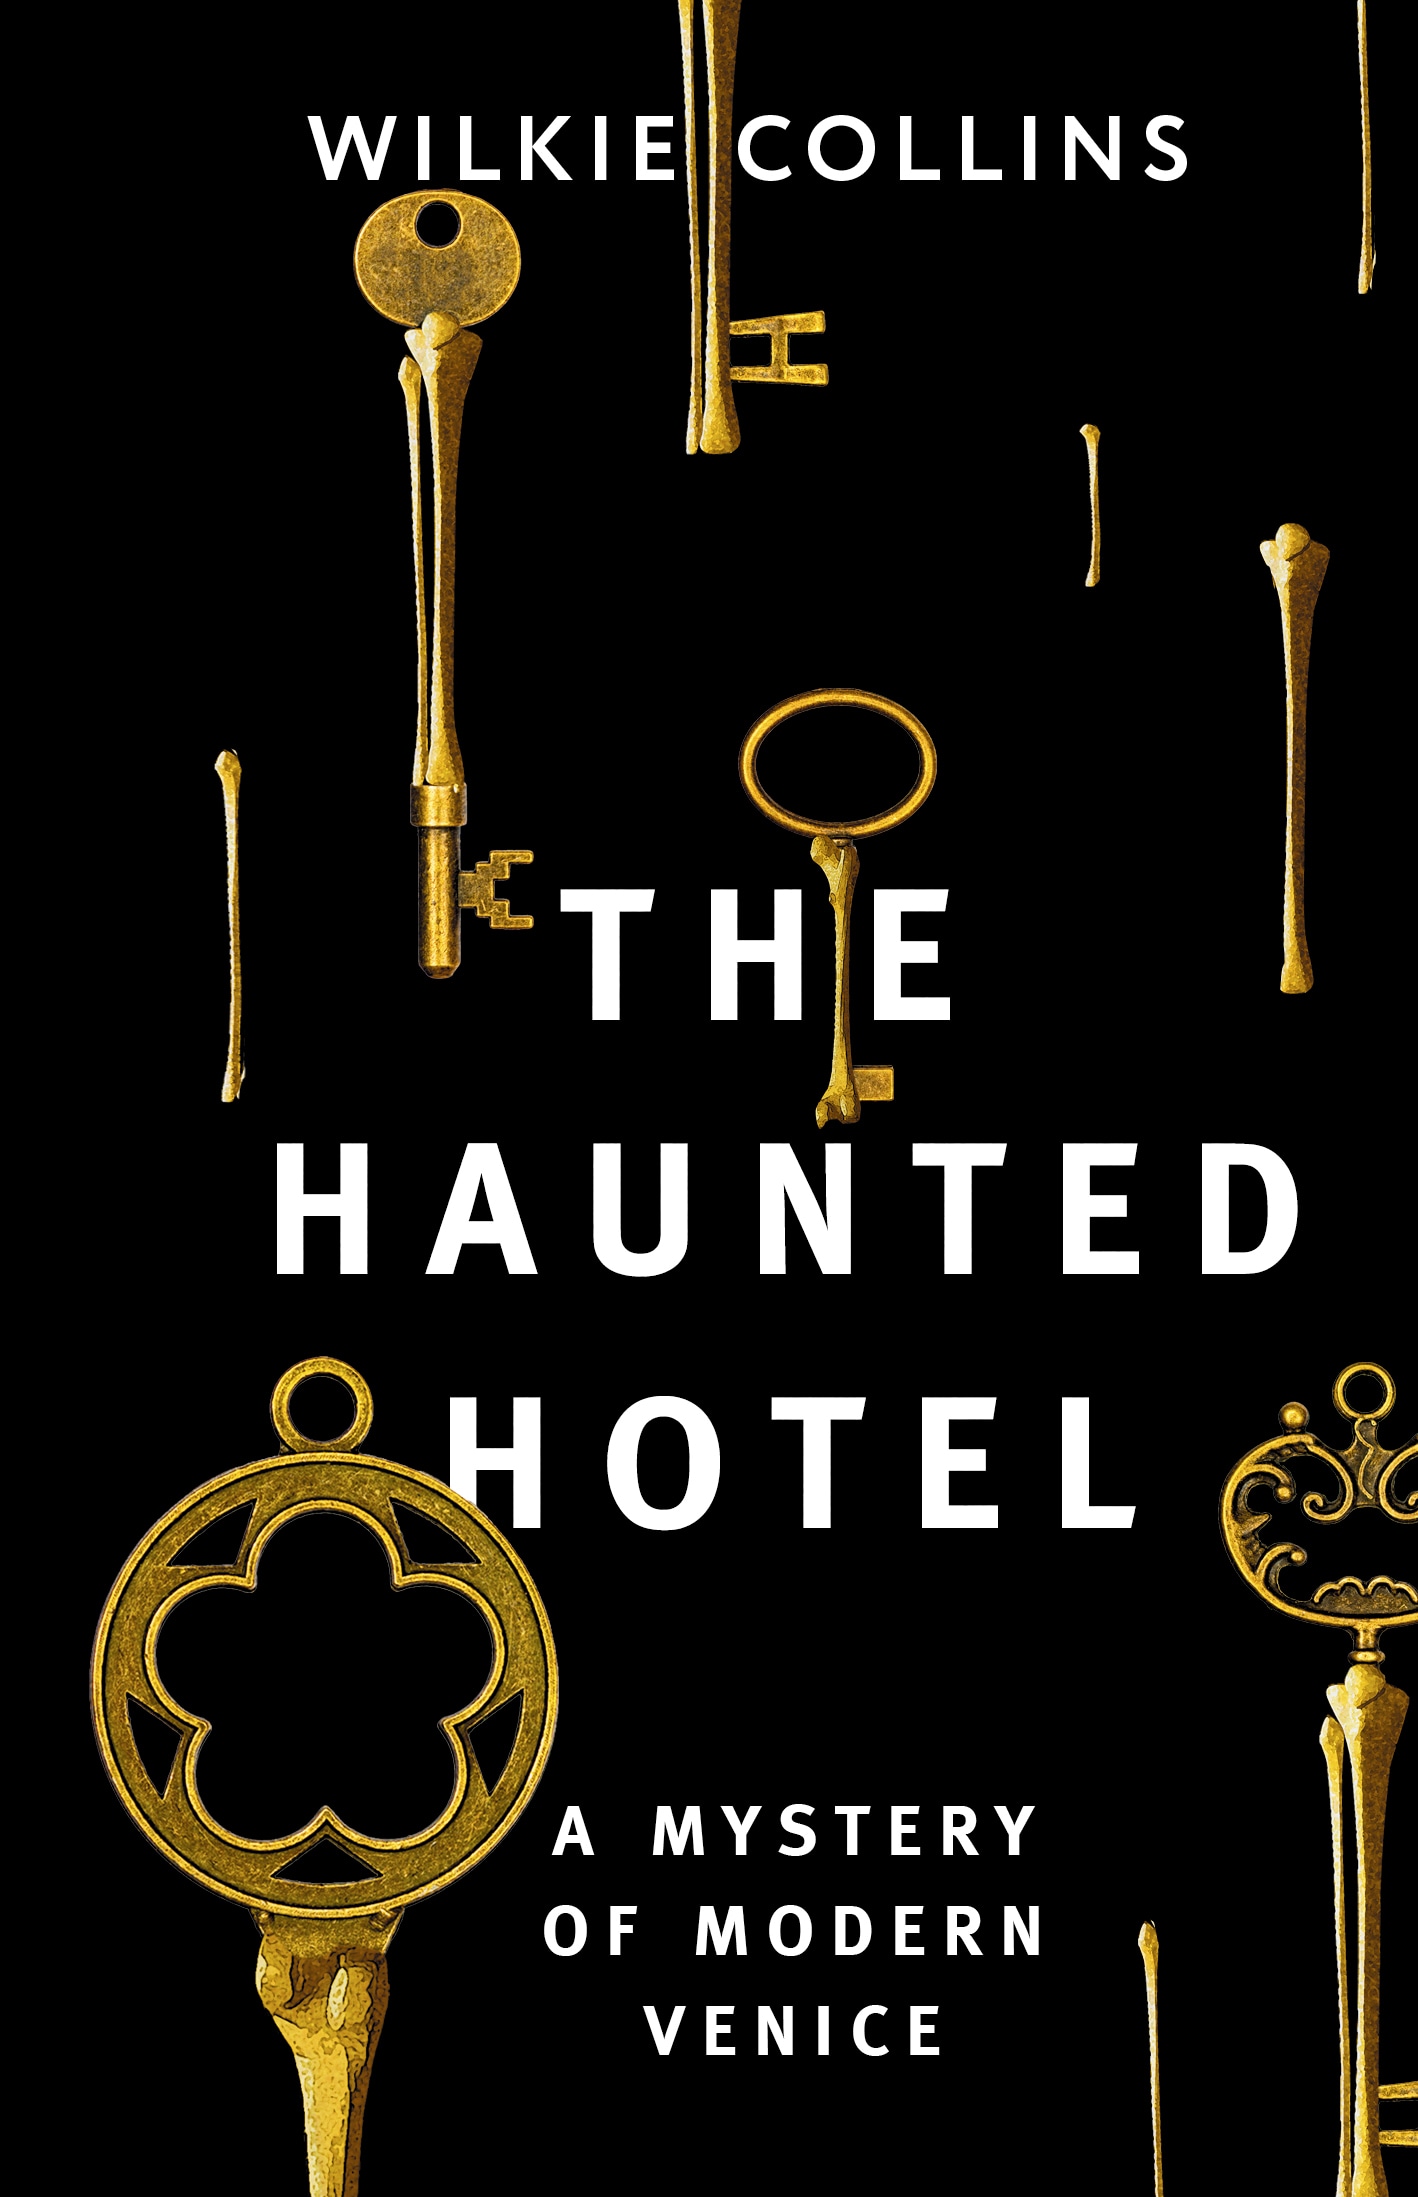 Book “The Haunted Hotel: A Mystery of Modern Venice” by Уилки Коллинз — 2023